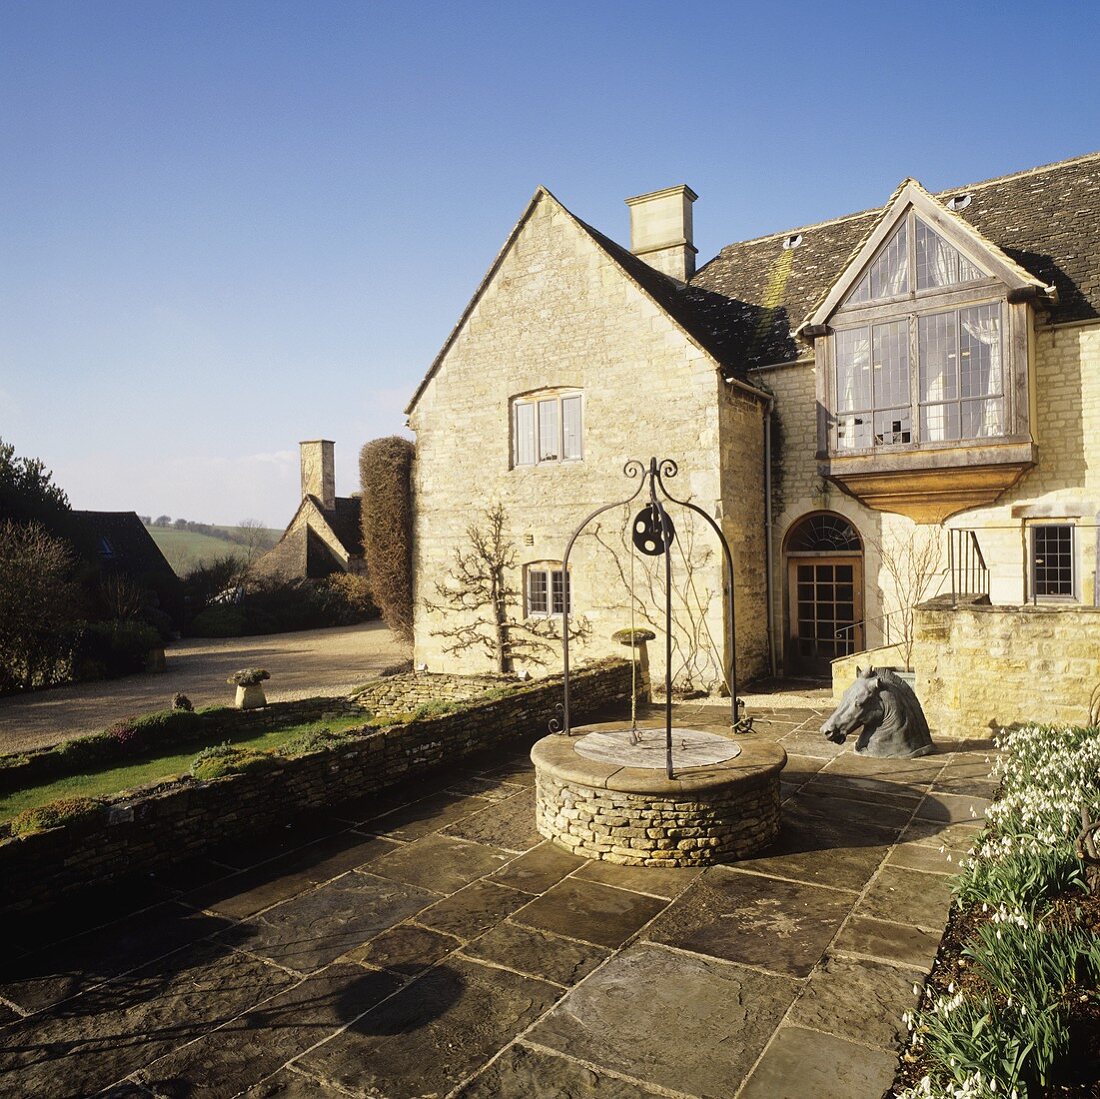 An English country house with a glazed bay window and an old decorative fountain in a courtyard